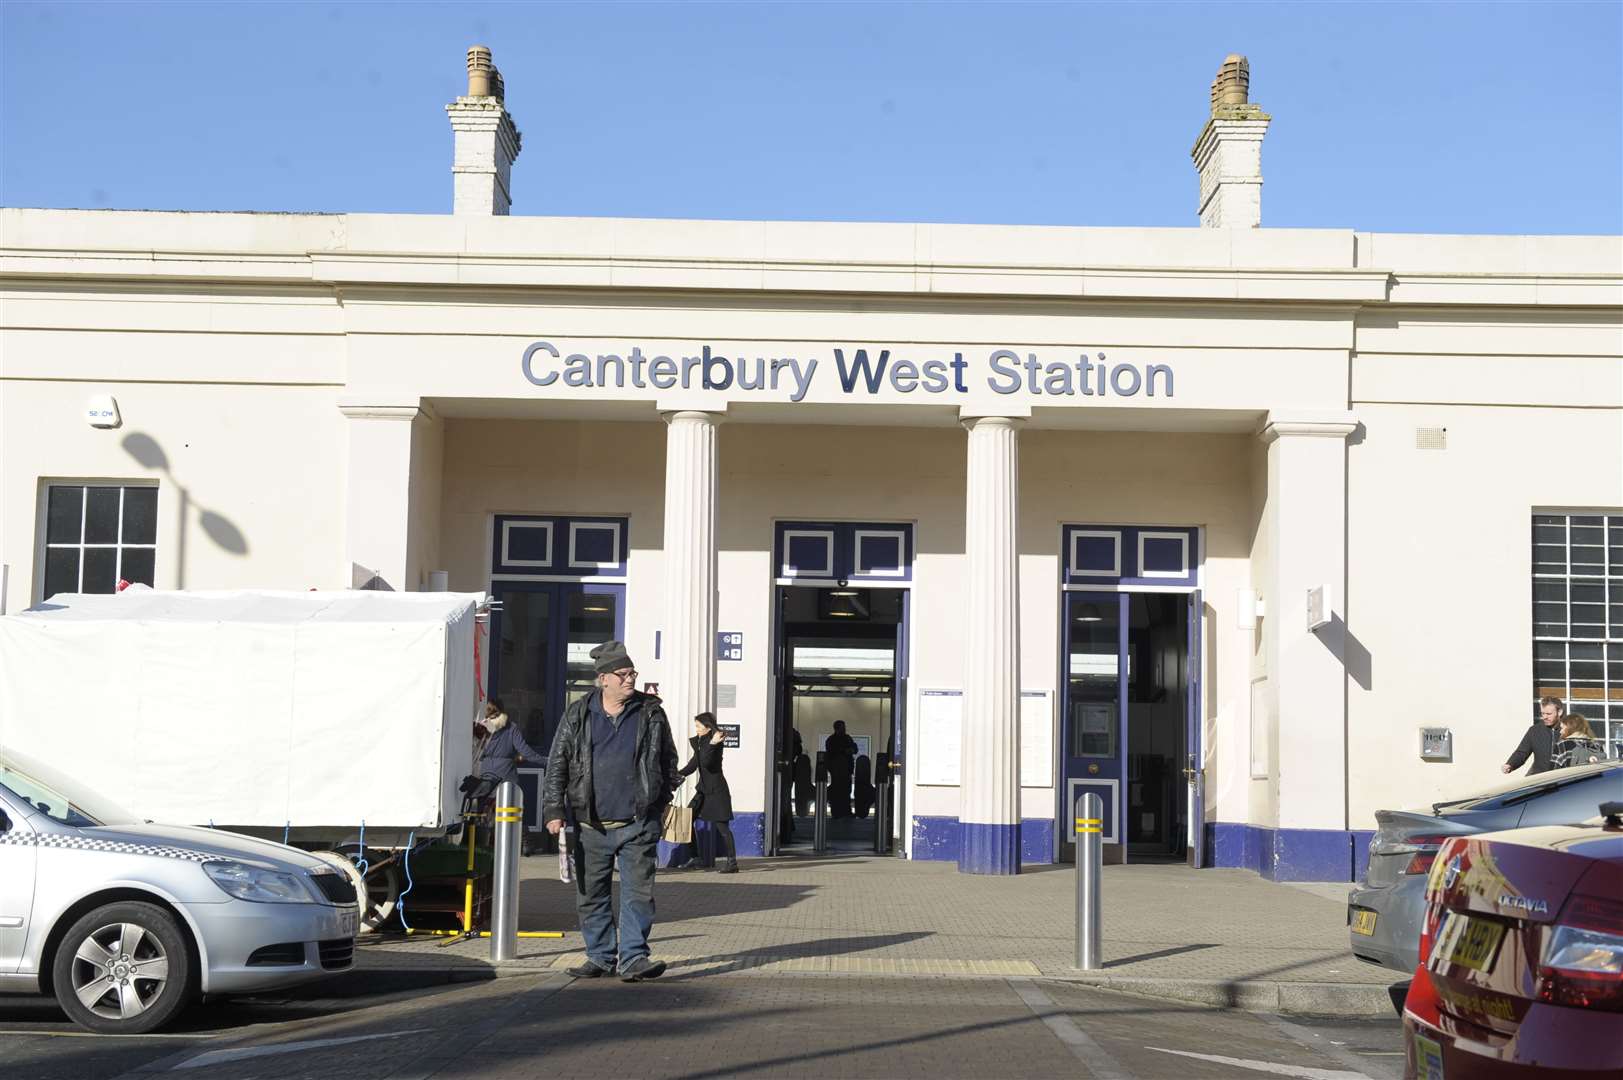 Canterbury West Station was also the scene of one of Sweetland's sex attacks